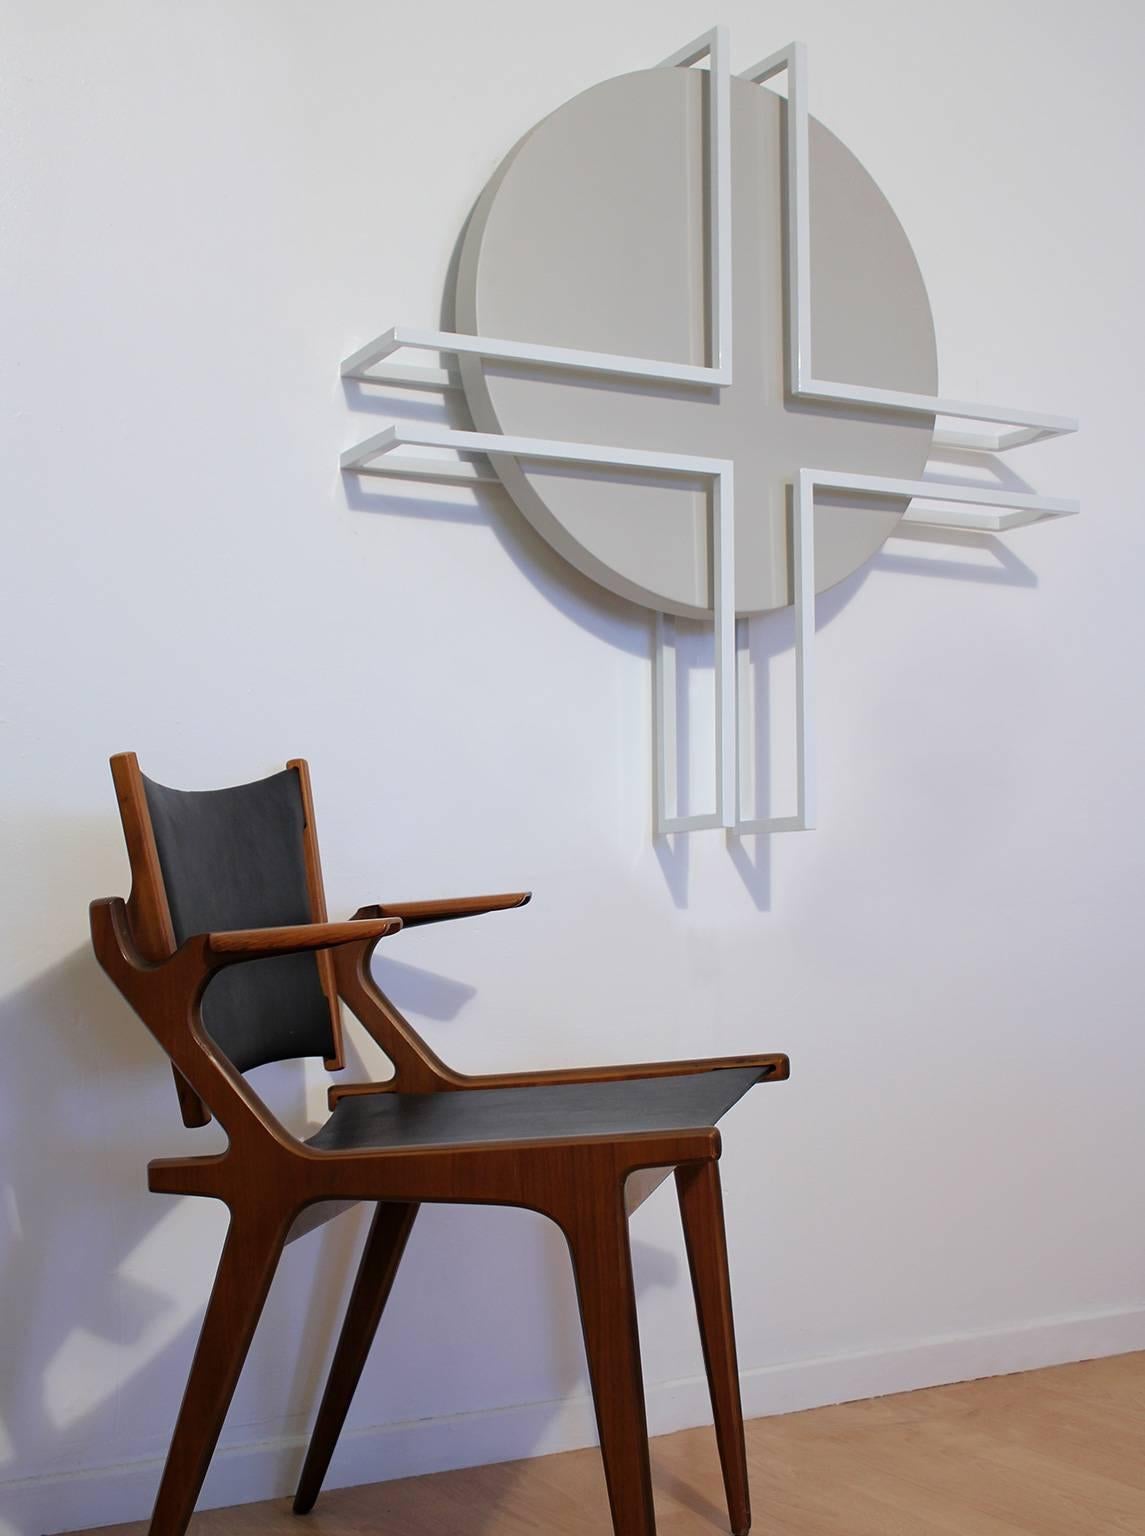 Minimalist wall mounted motorized kinetic sculpture by Southern California sculptor Stephen Beck-von-Peccoz. 